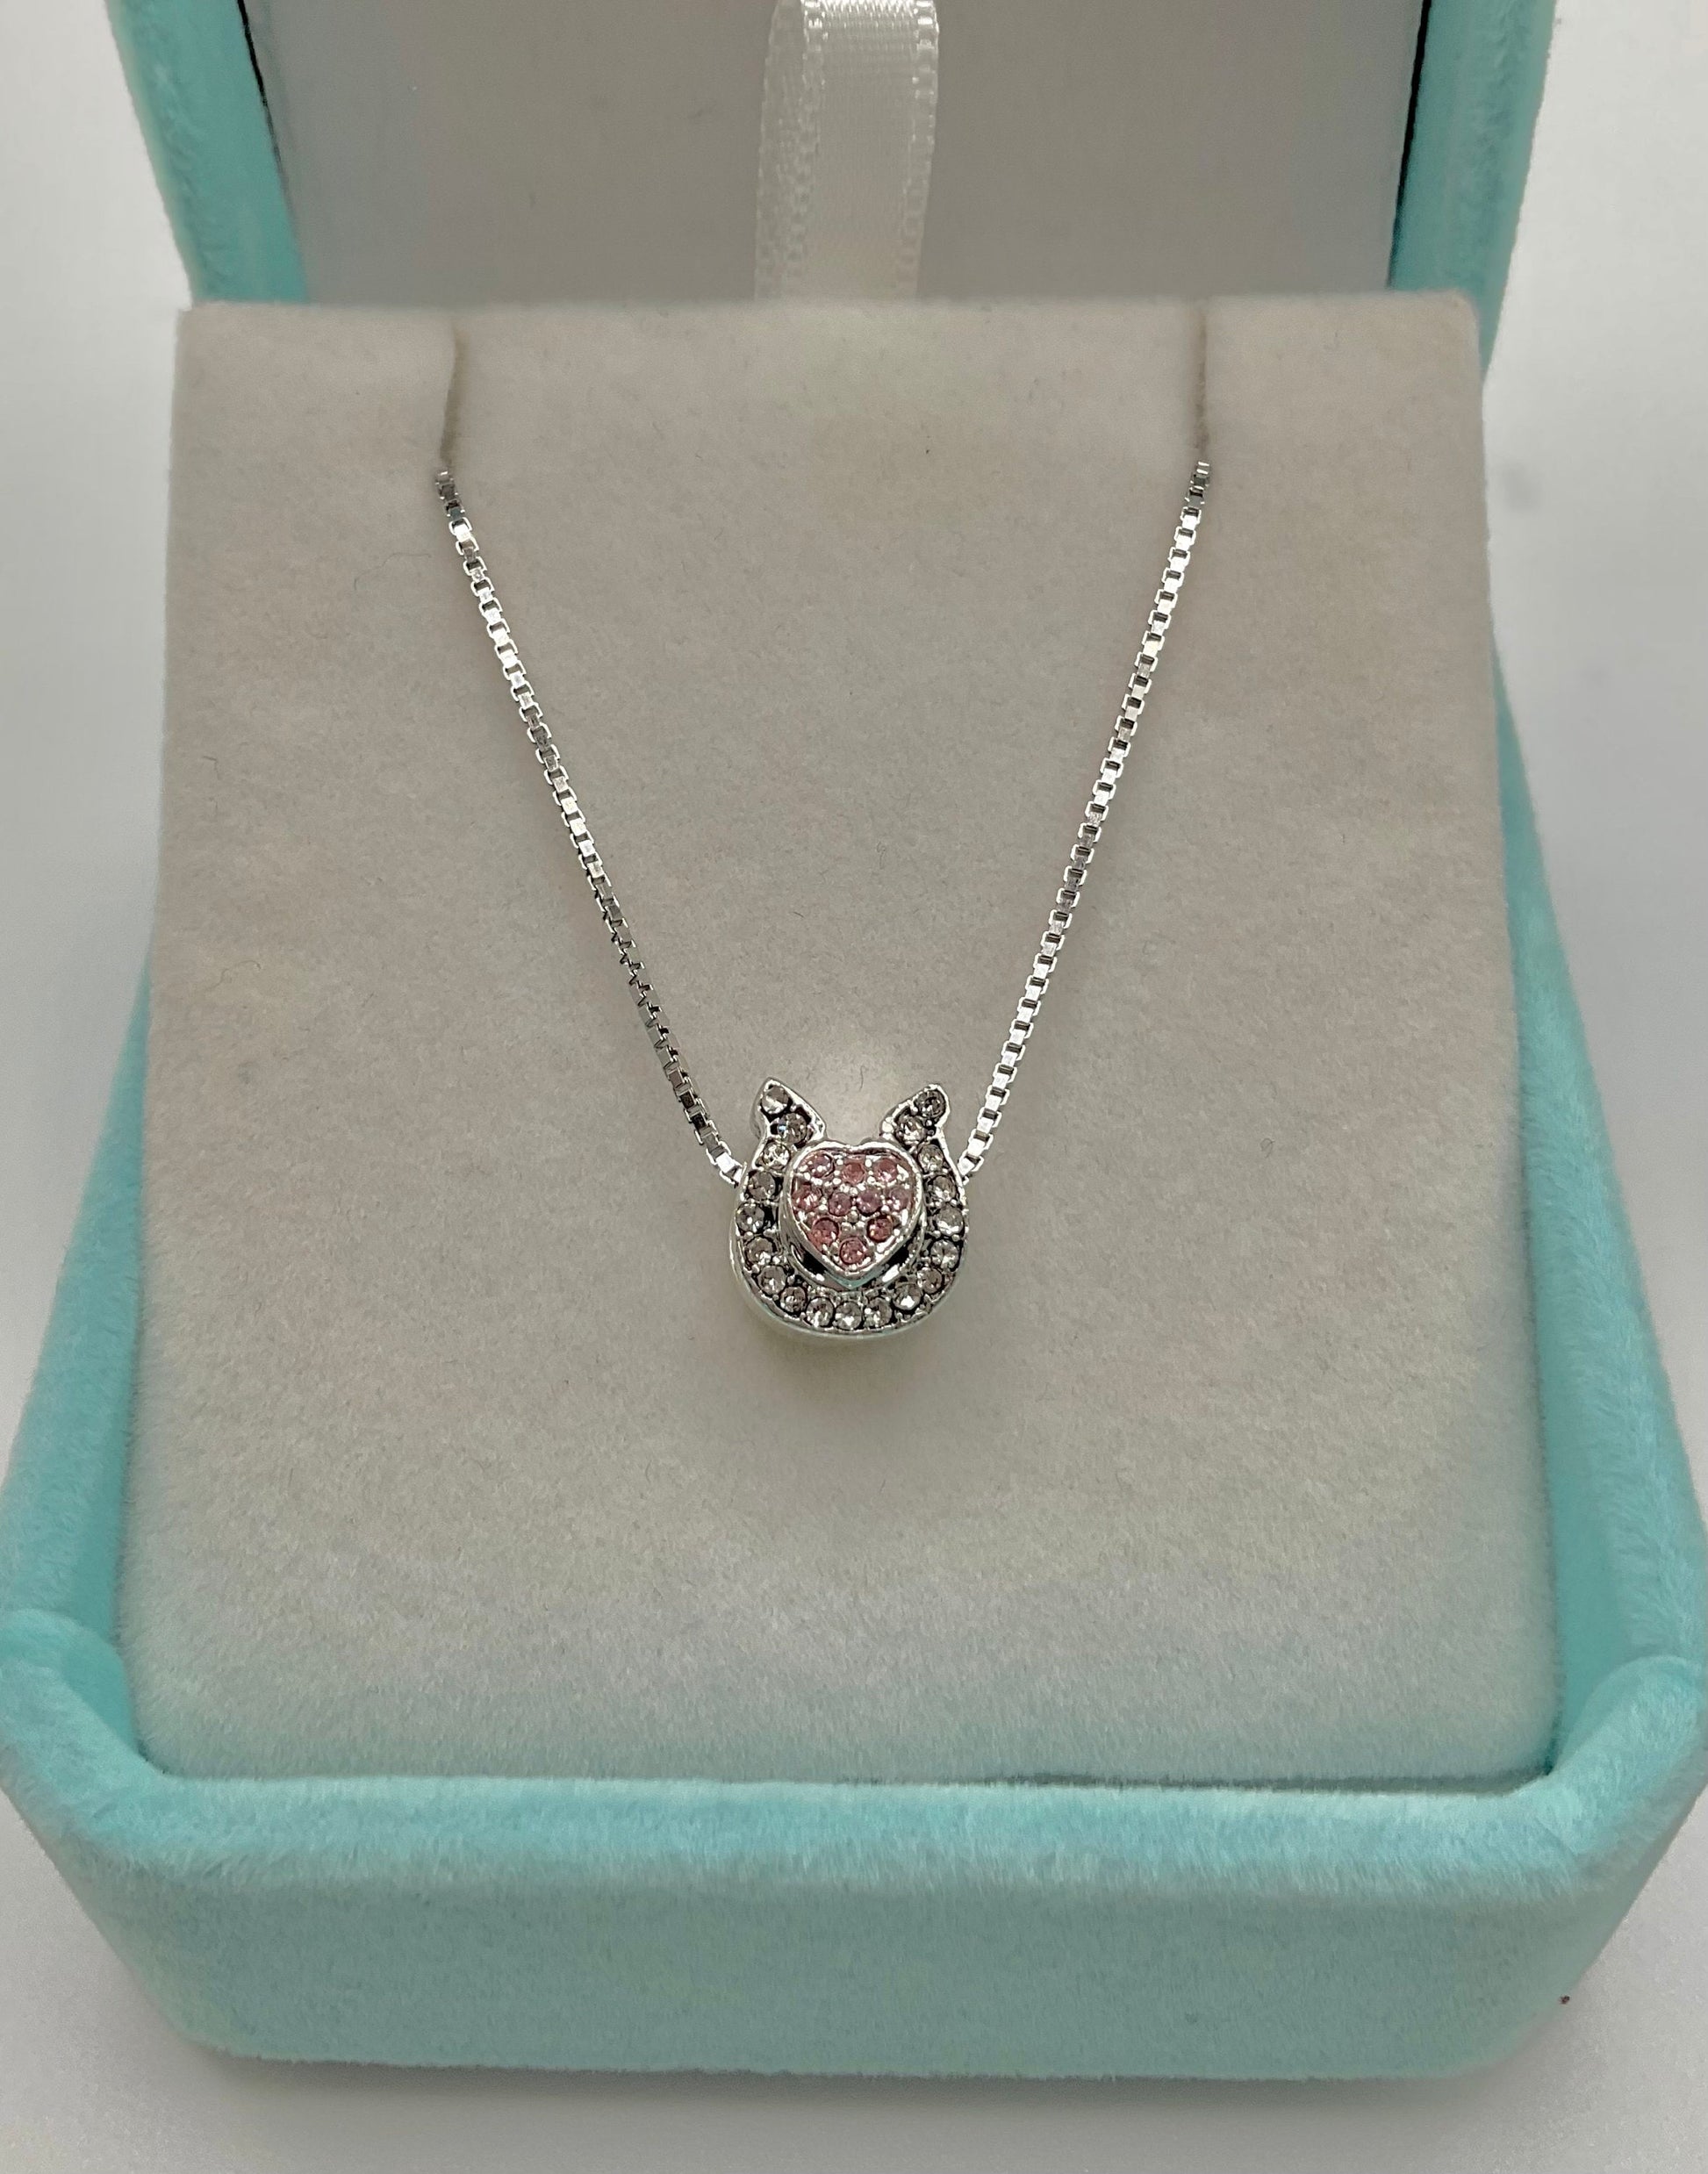 Pink Tulip Rhinestone Necklace Pendant on an 18” Sterling Silver Box Chain